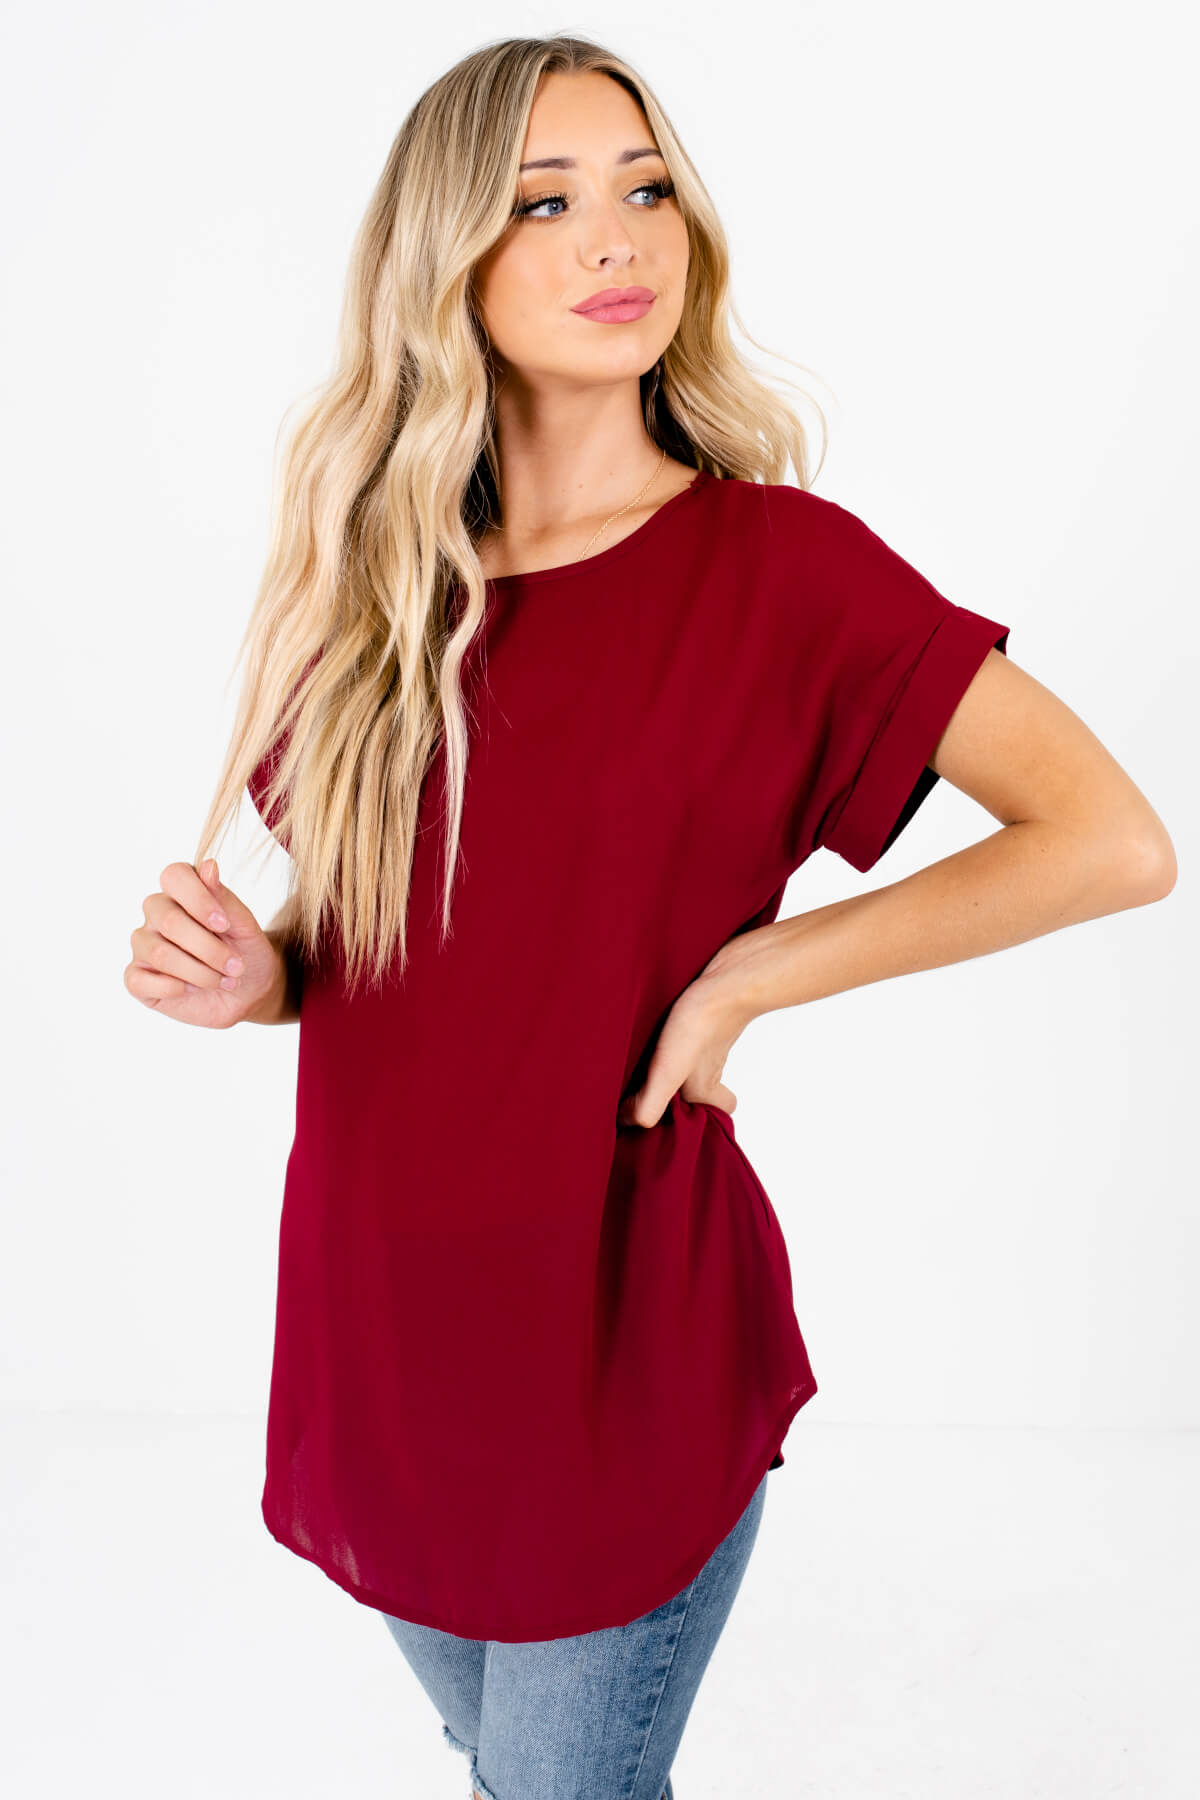 Burgundy Cute and Comfortable Boutique Blouses for Women